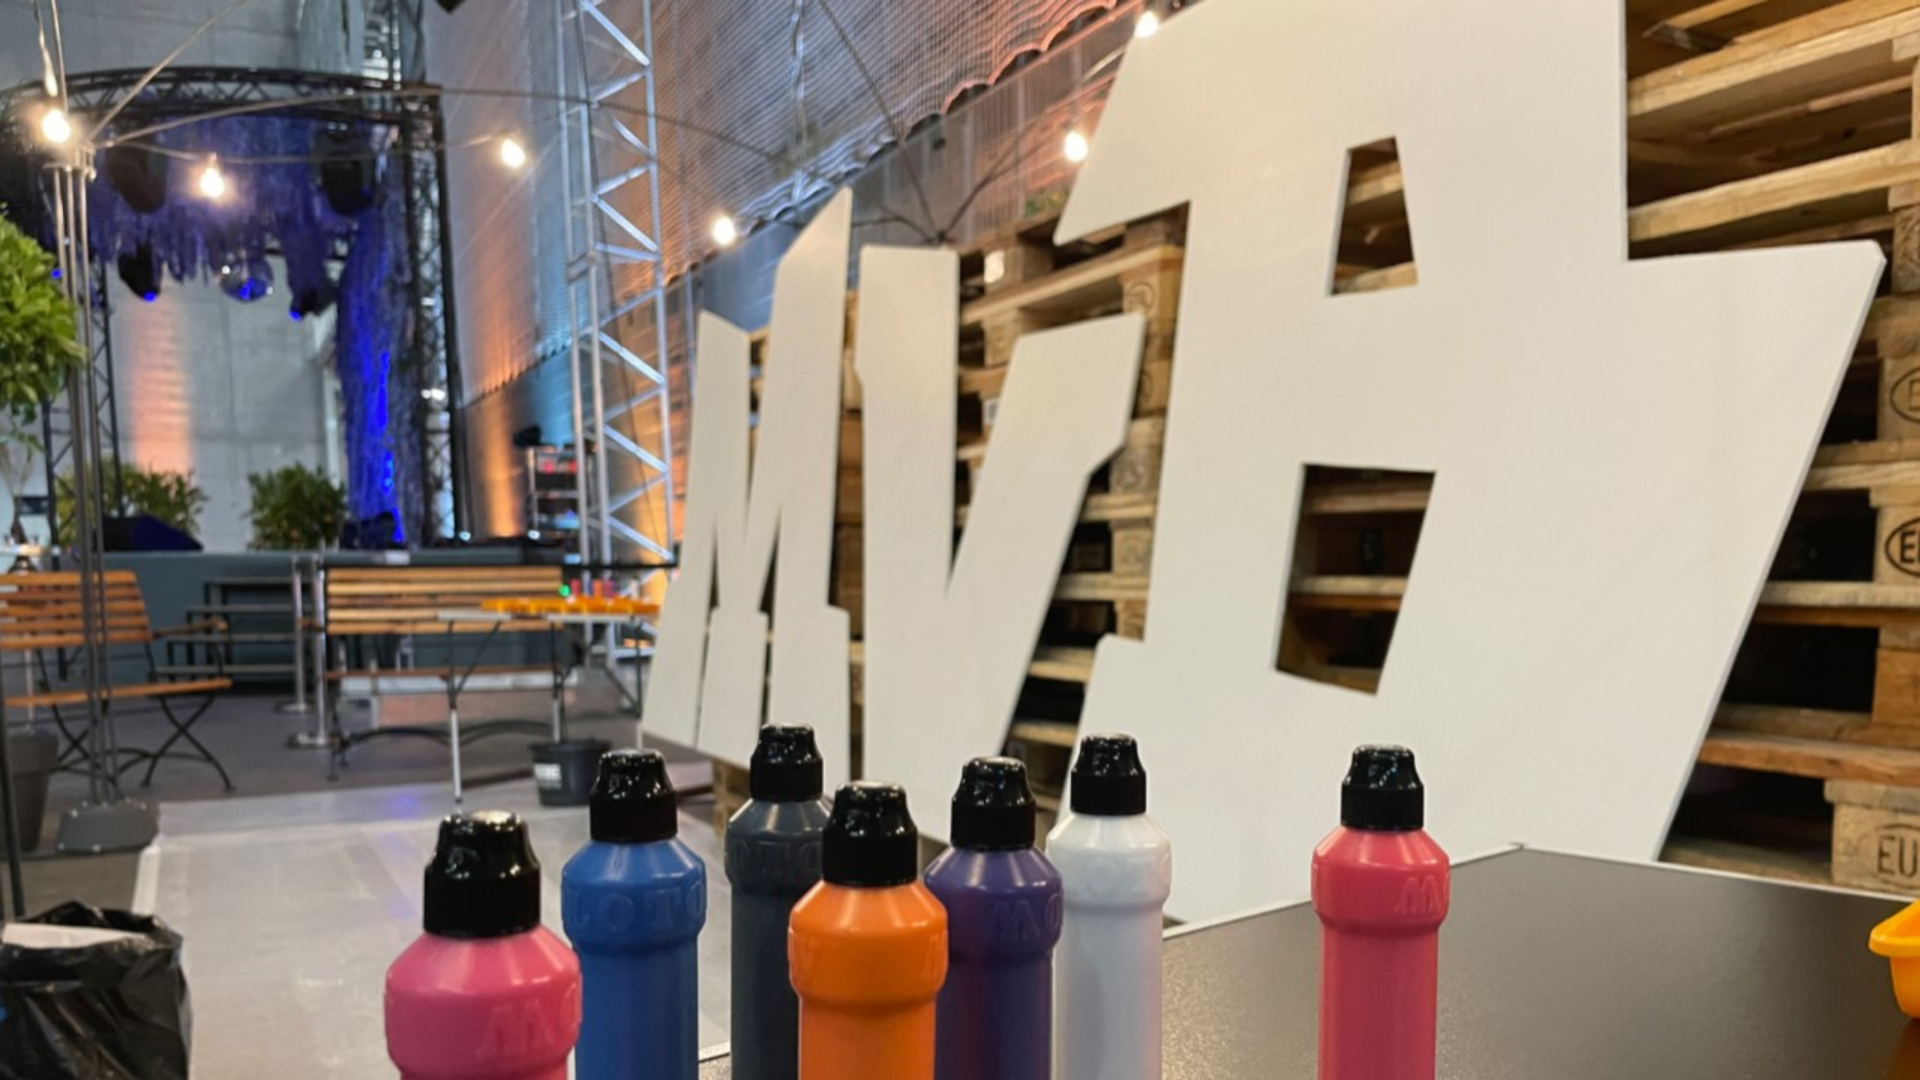 Large cut-out letters and colorful paint bottles